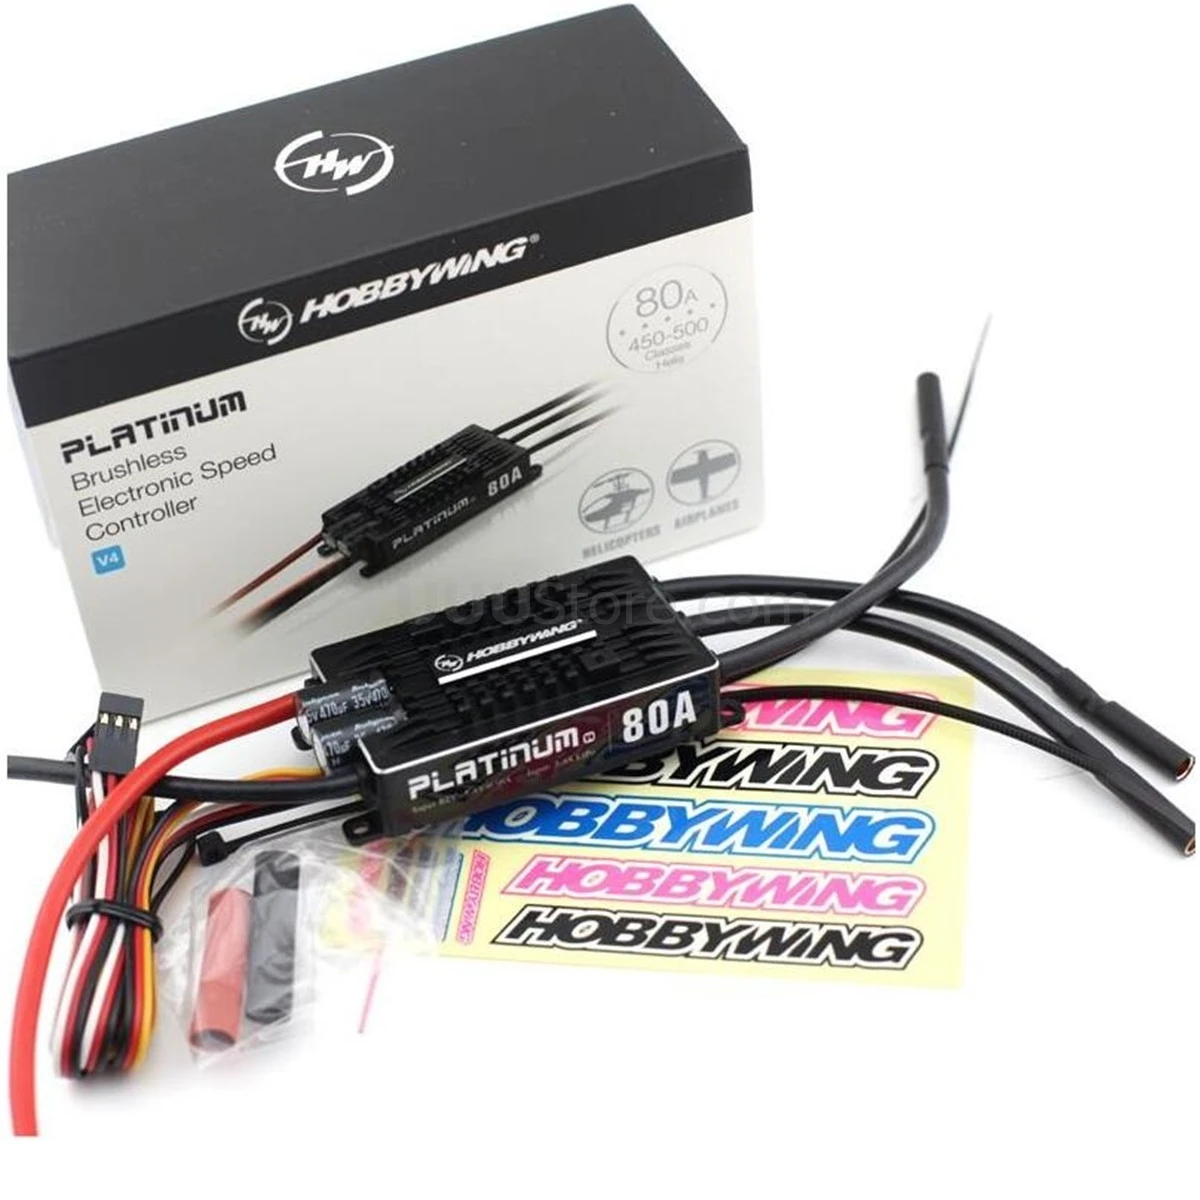 HobbyWing Platinum 80A V4 ESC 3S-6S BEC 5-8V 10A for 450L-500 Class Heli RC Drone Aircraft Helicopter 5